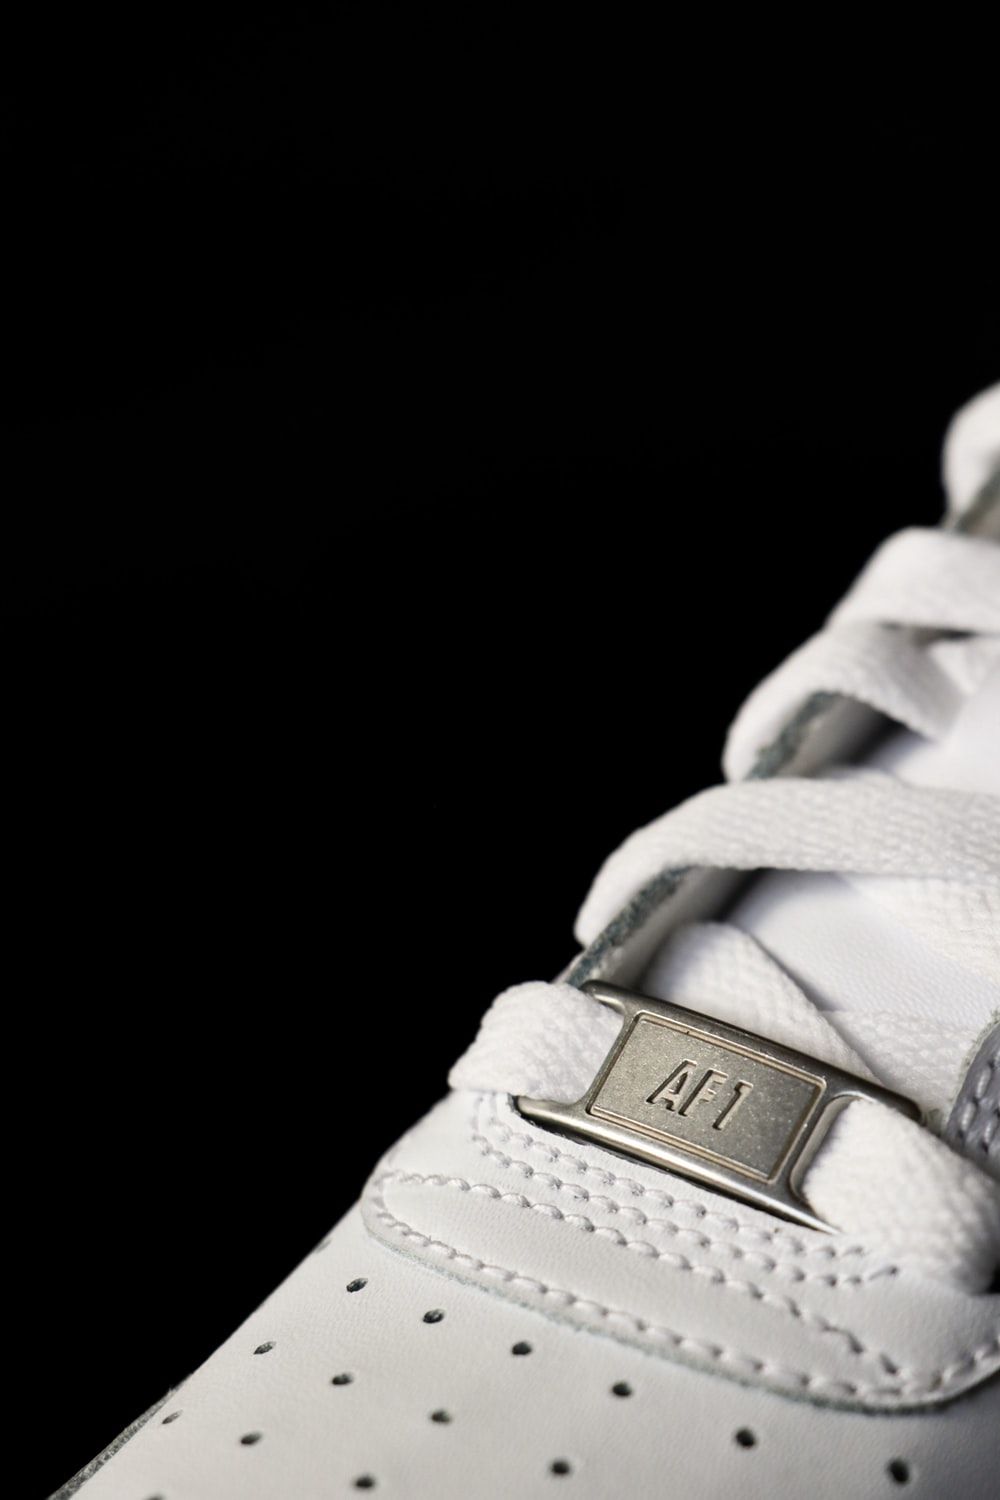 Nike Air Force 1 White Sneaker Picture. Download Free Image